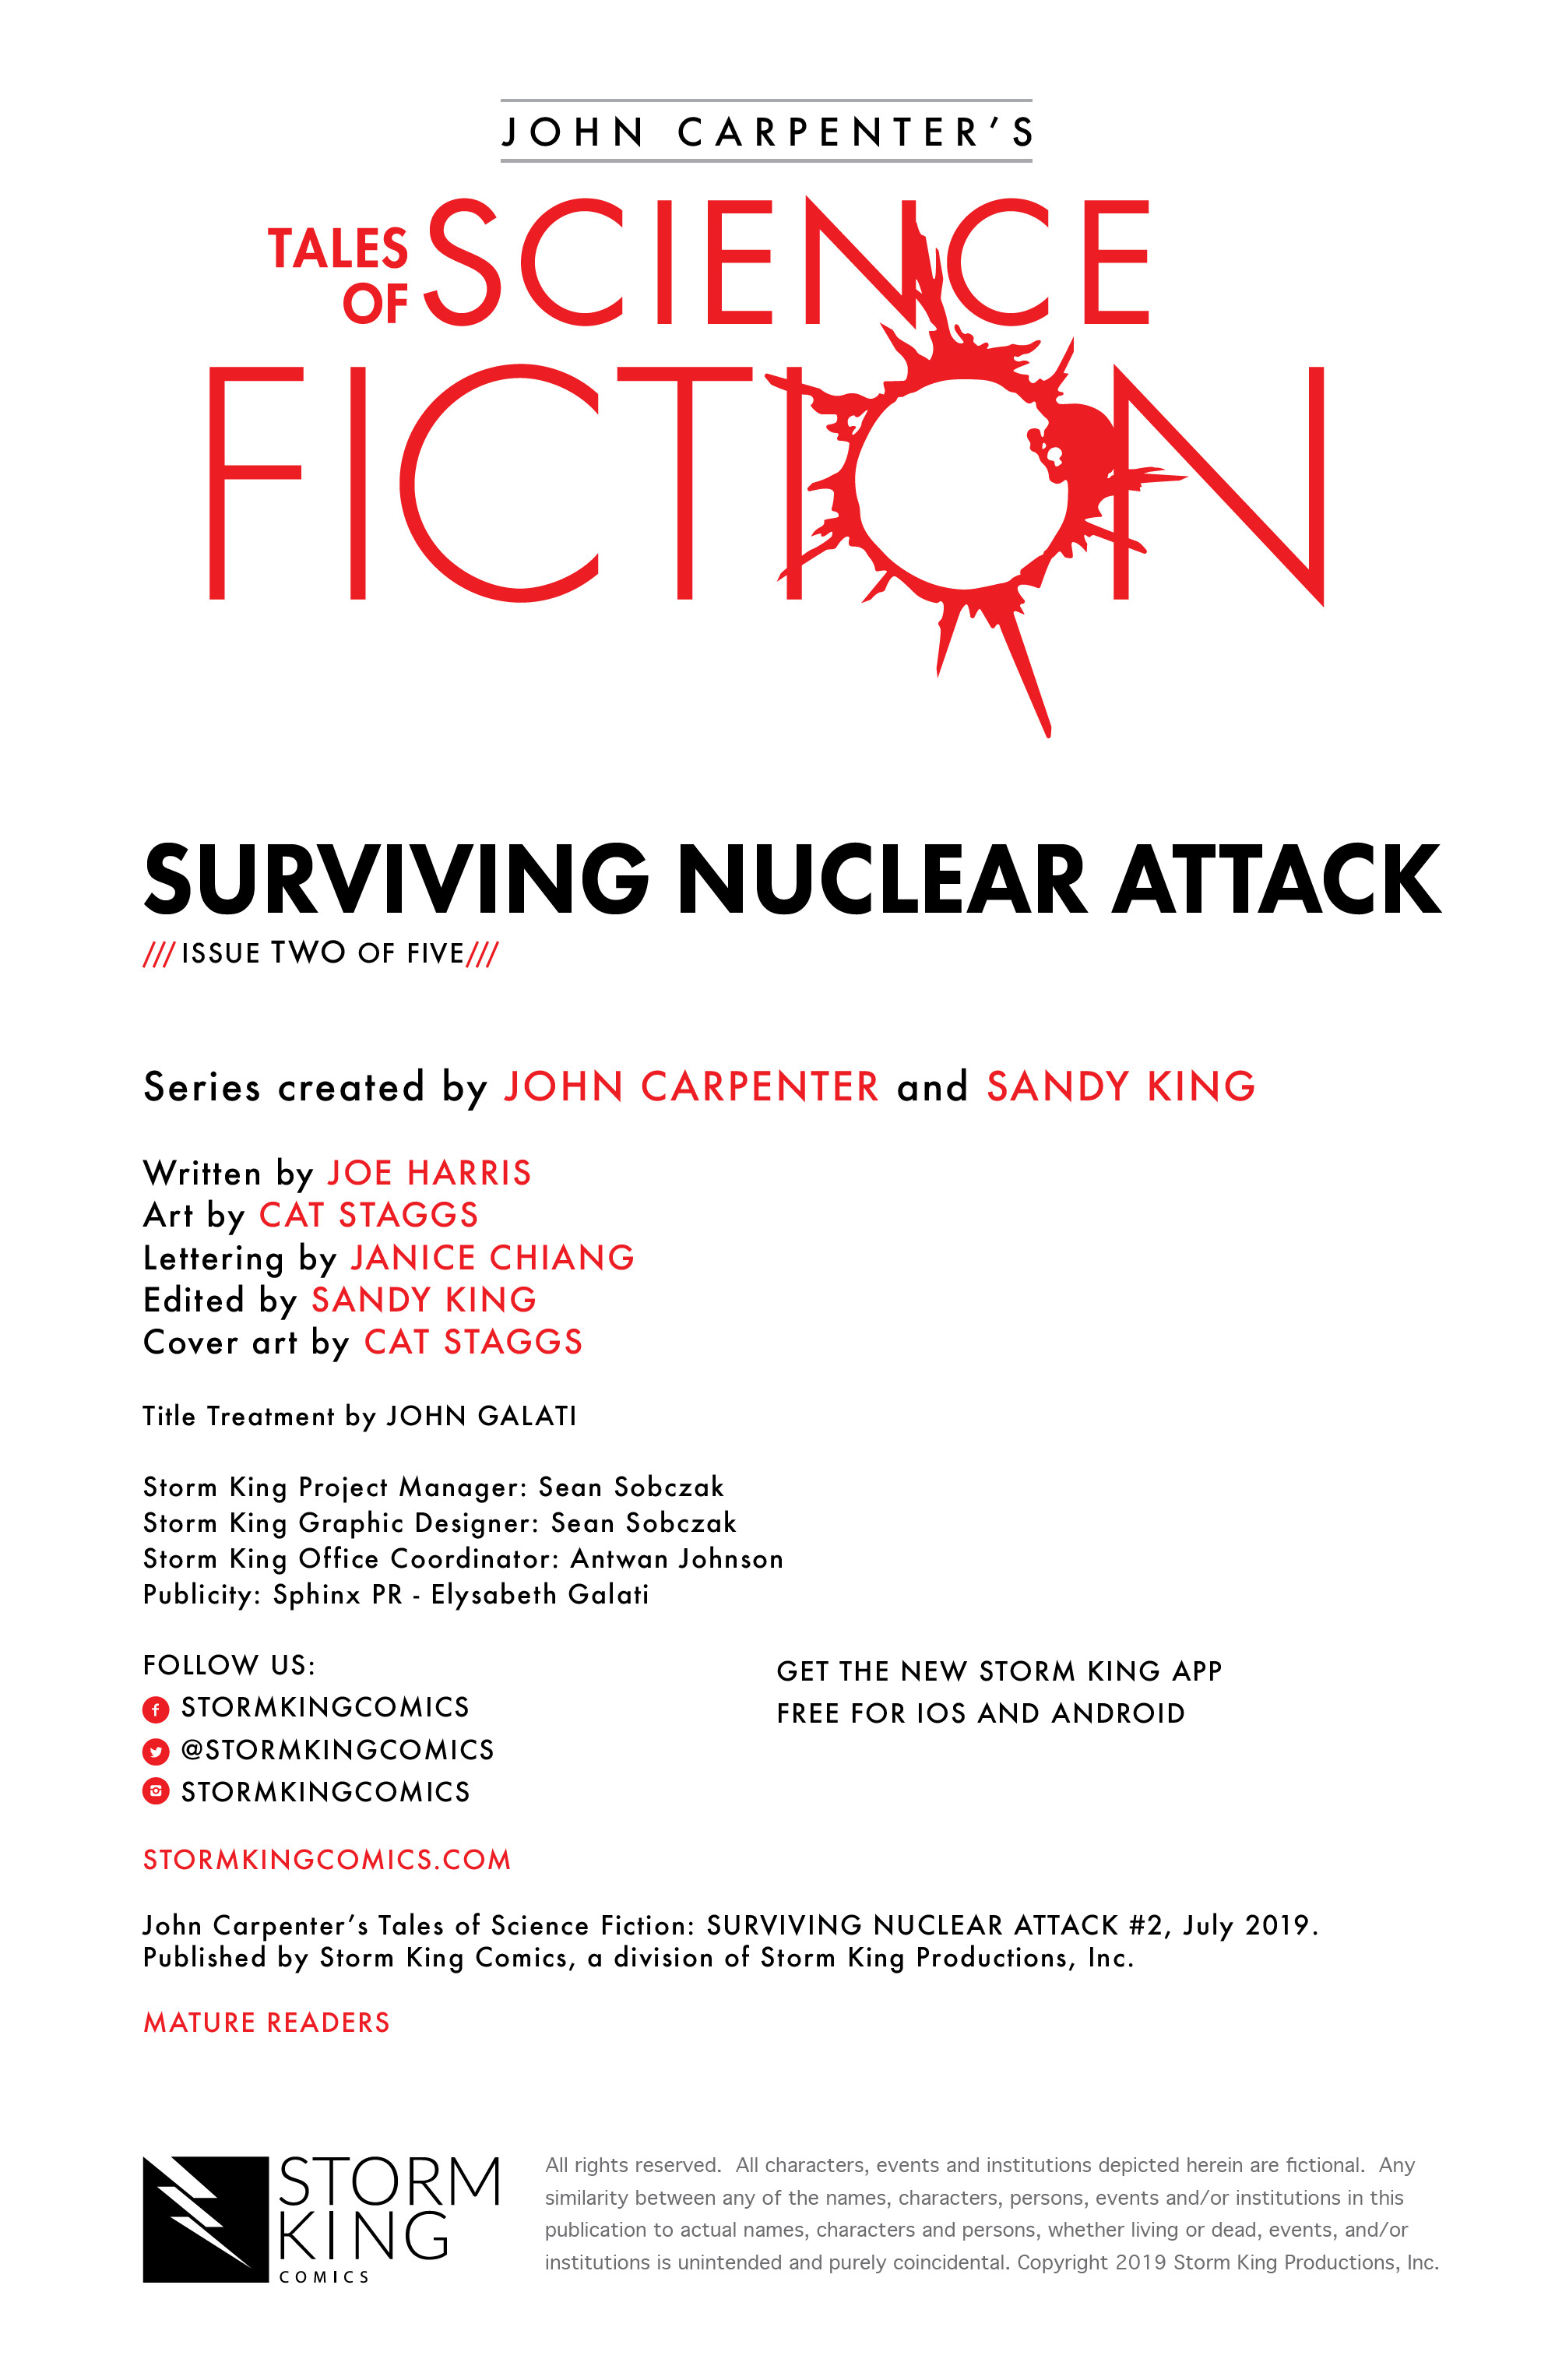 Read online John Carpenter's Tales of Science Fiction: Surviving Nuclear Attack comic -  Issue #2 - 2